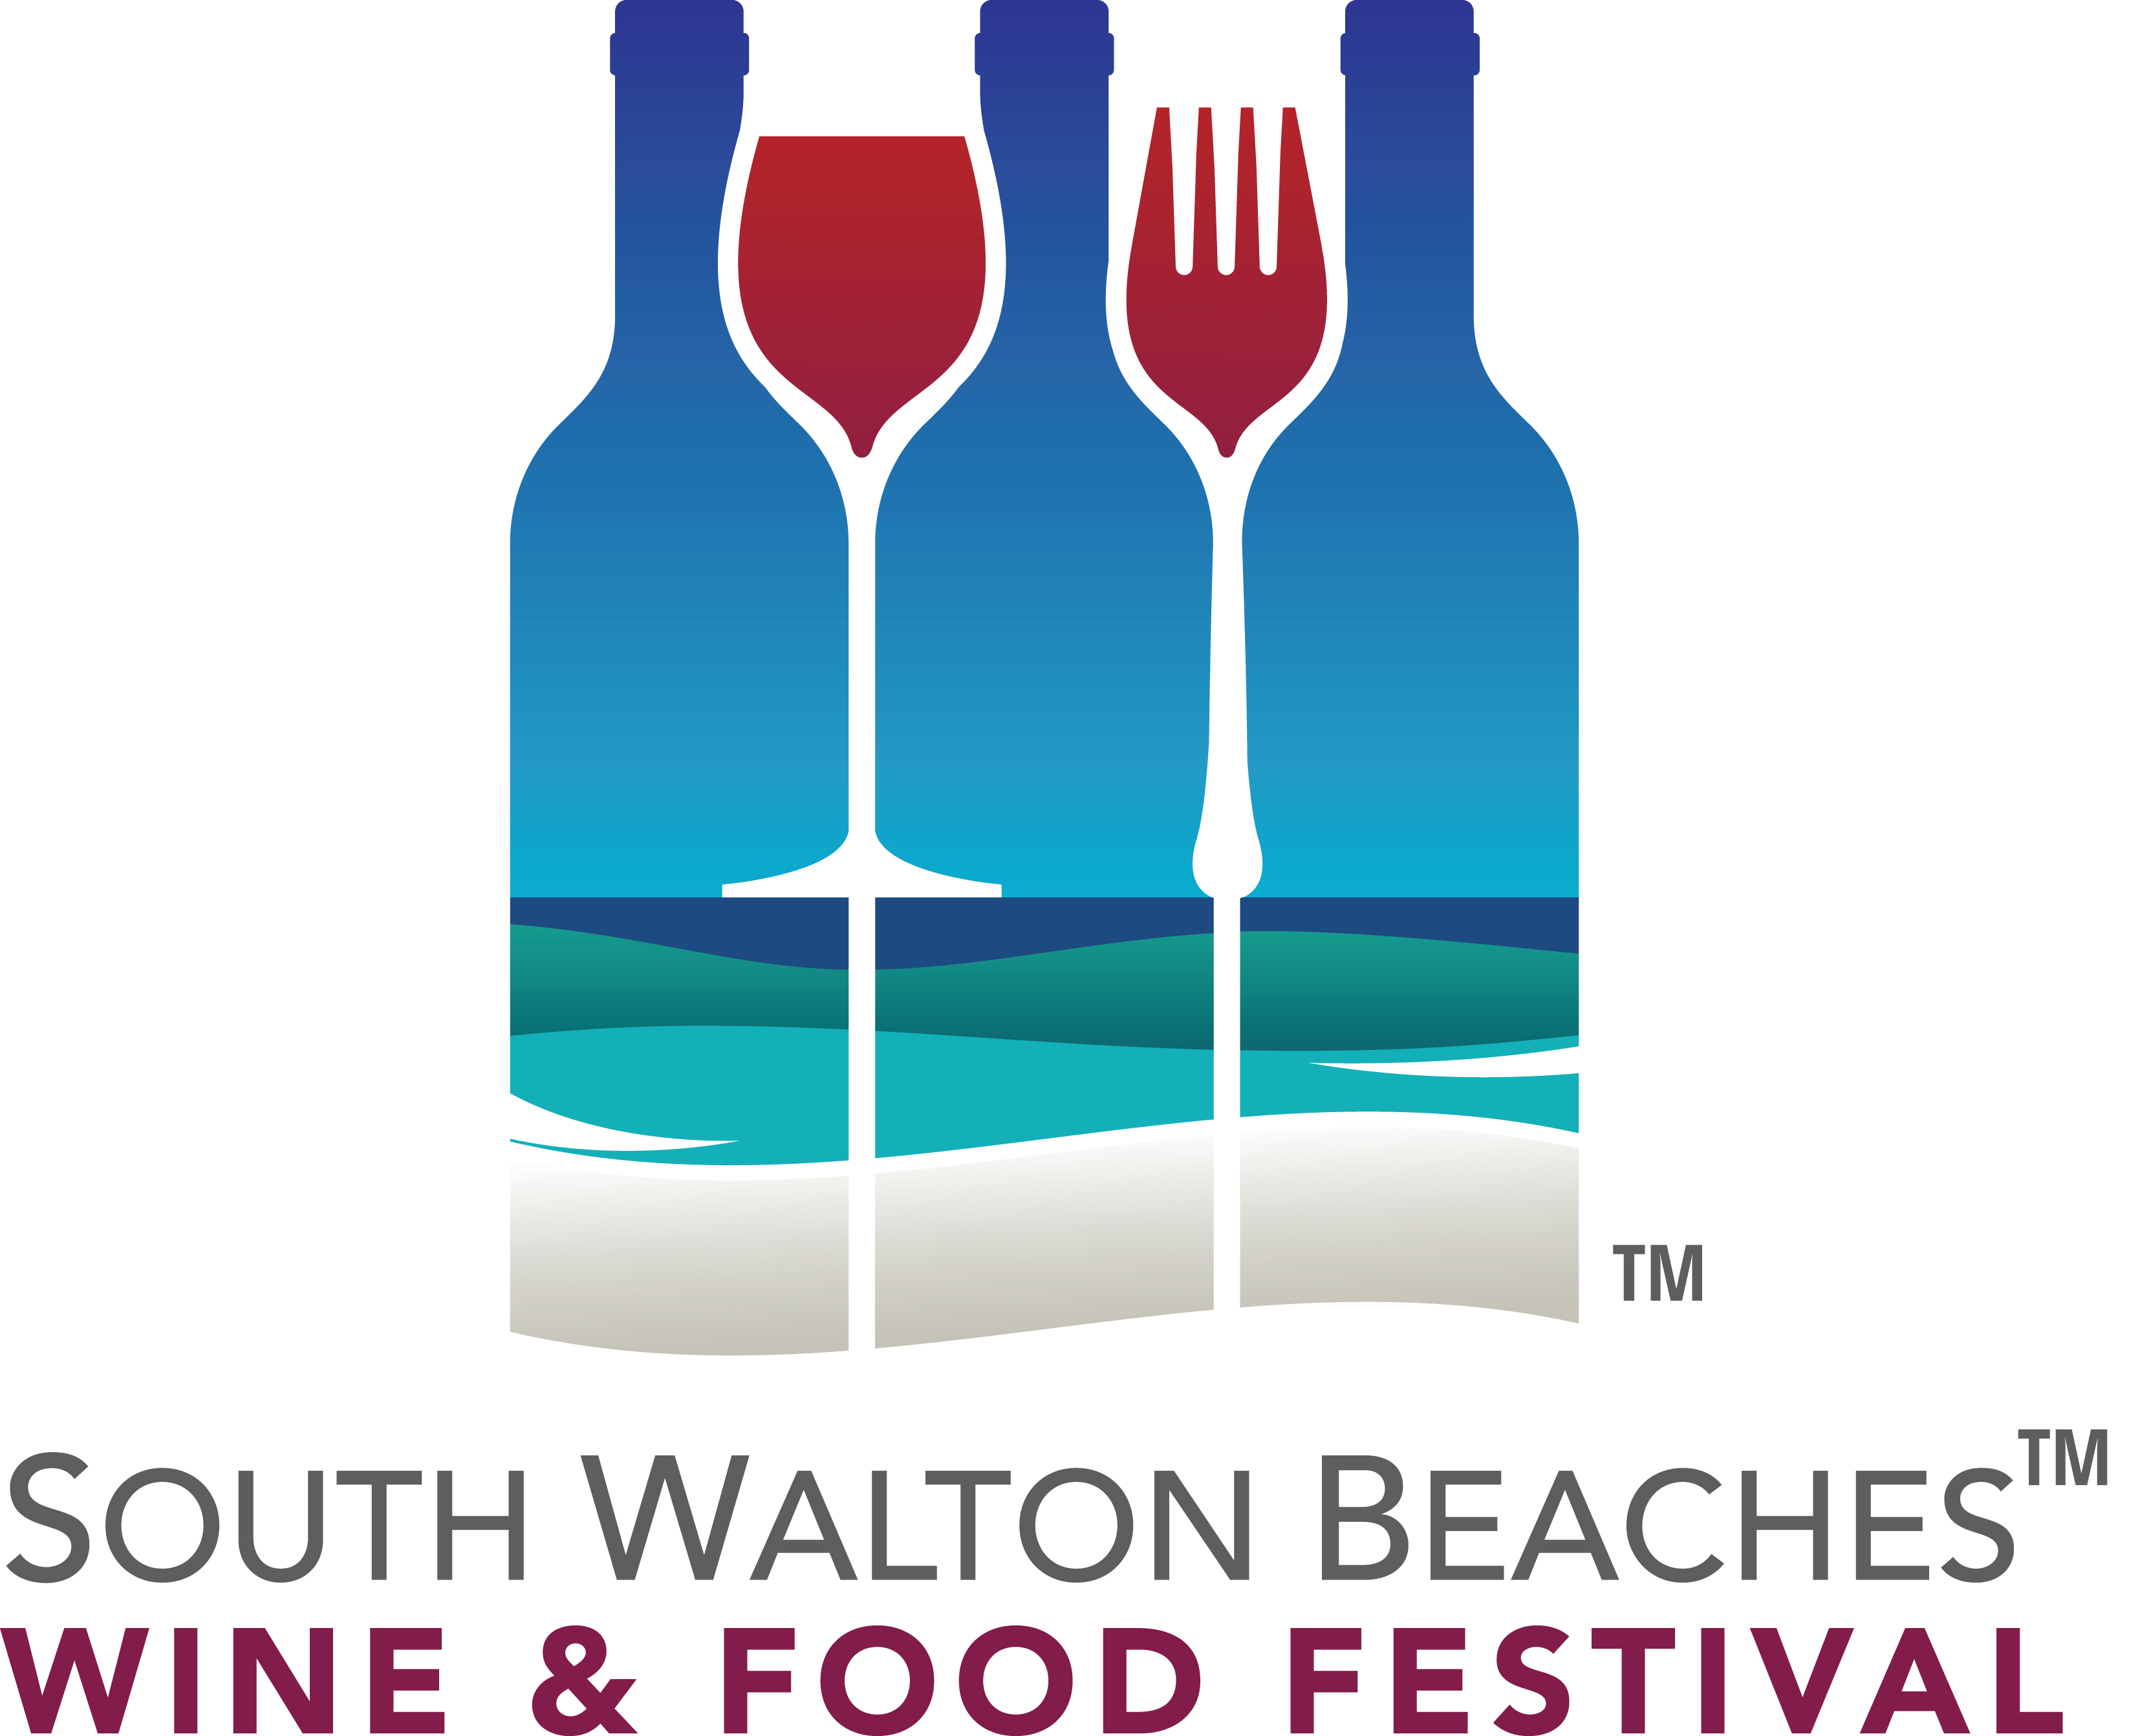 South Walton Beaches Wine & Food Festival Welcomes Celebrity Winemakers, Master Distillers, Chefs and More.